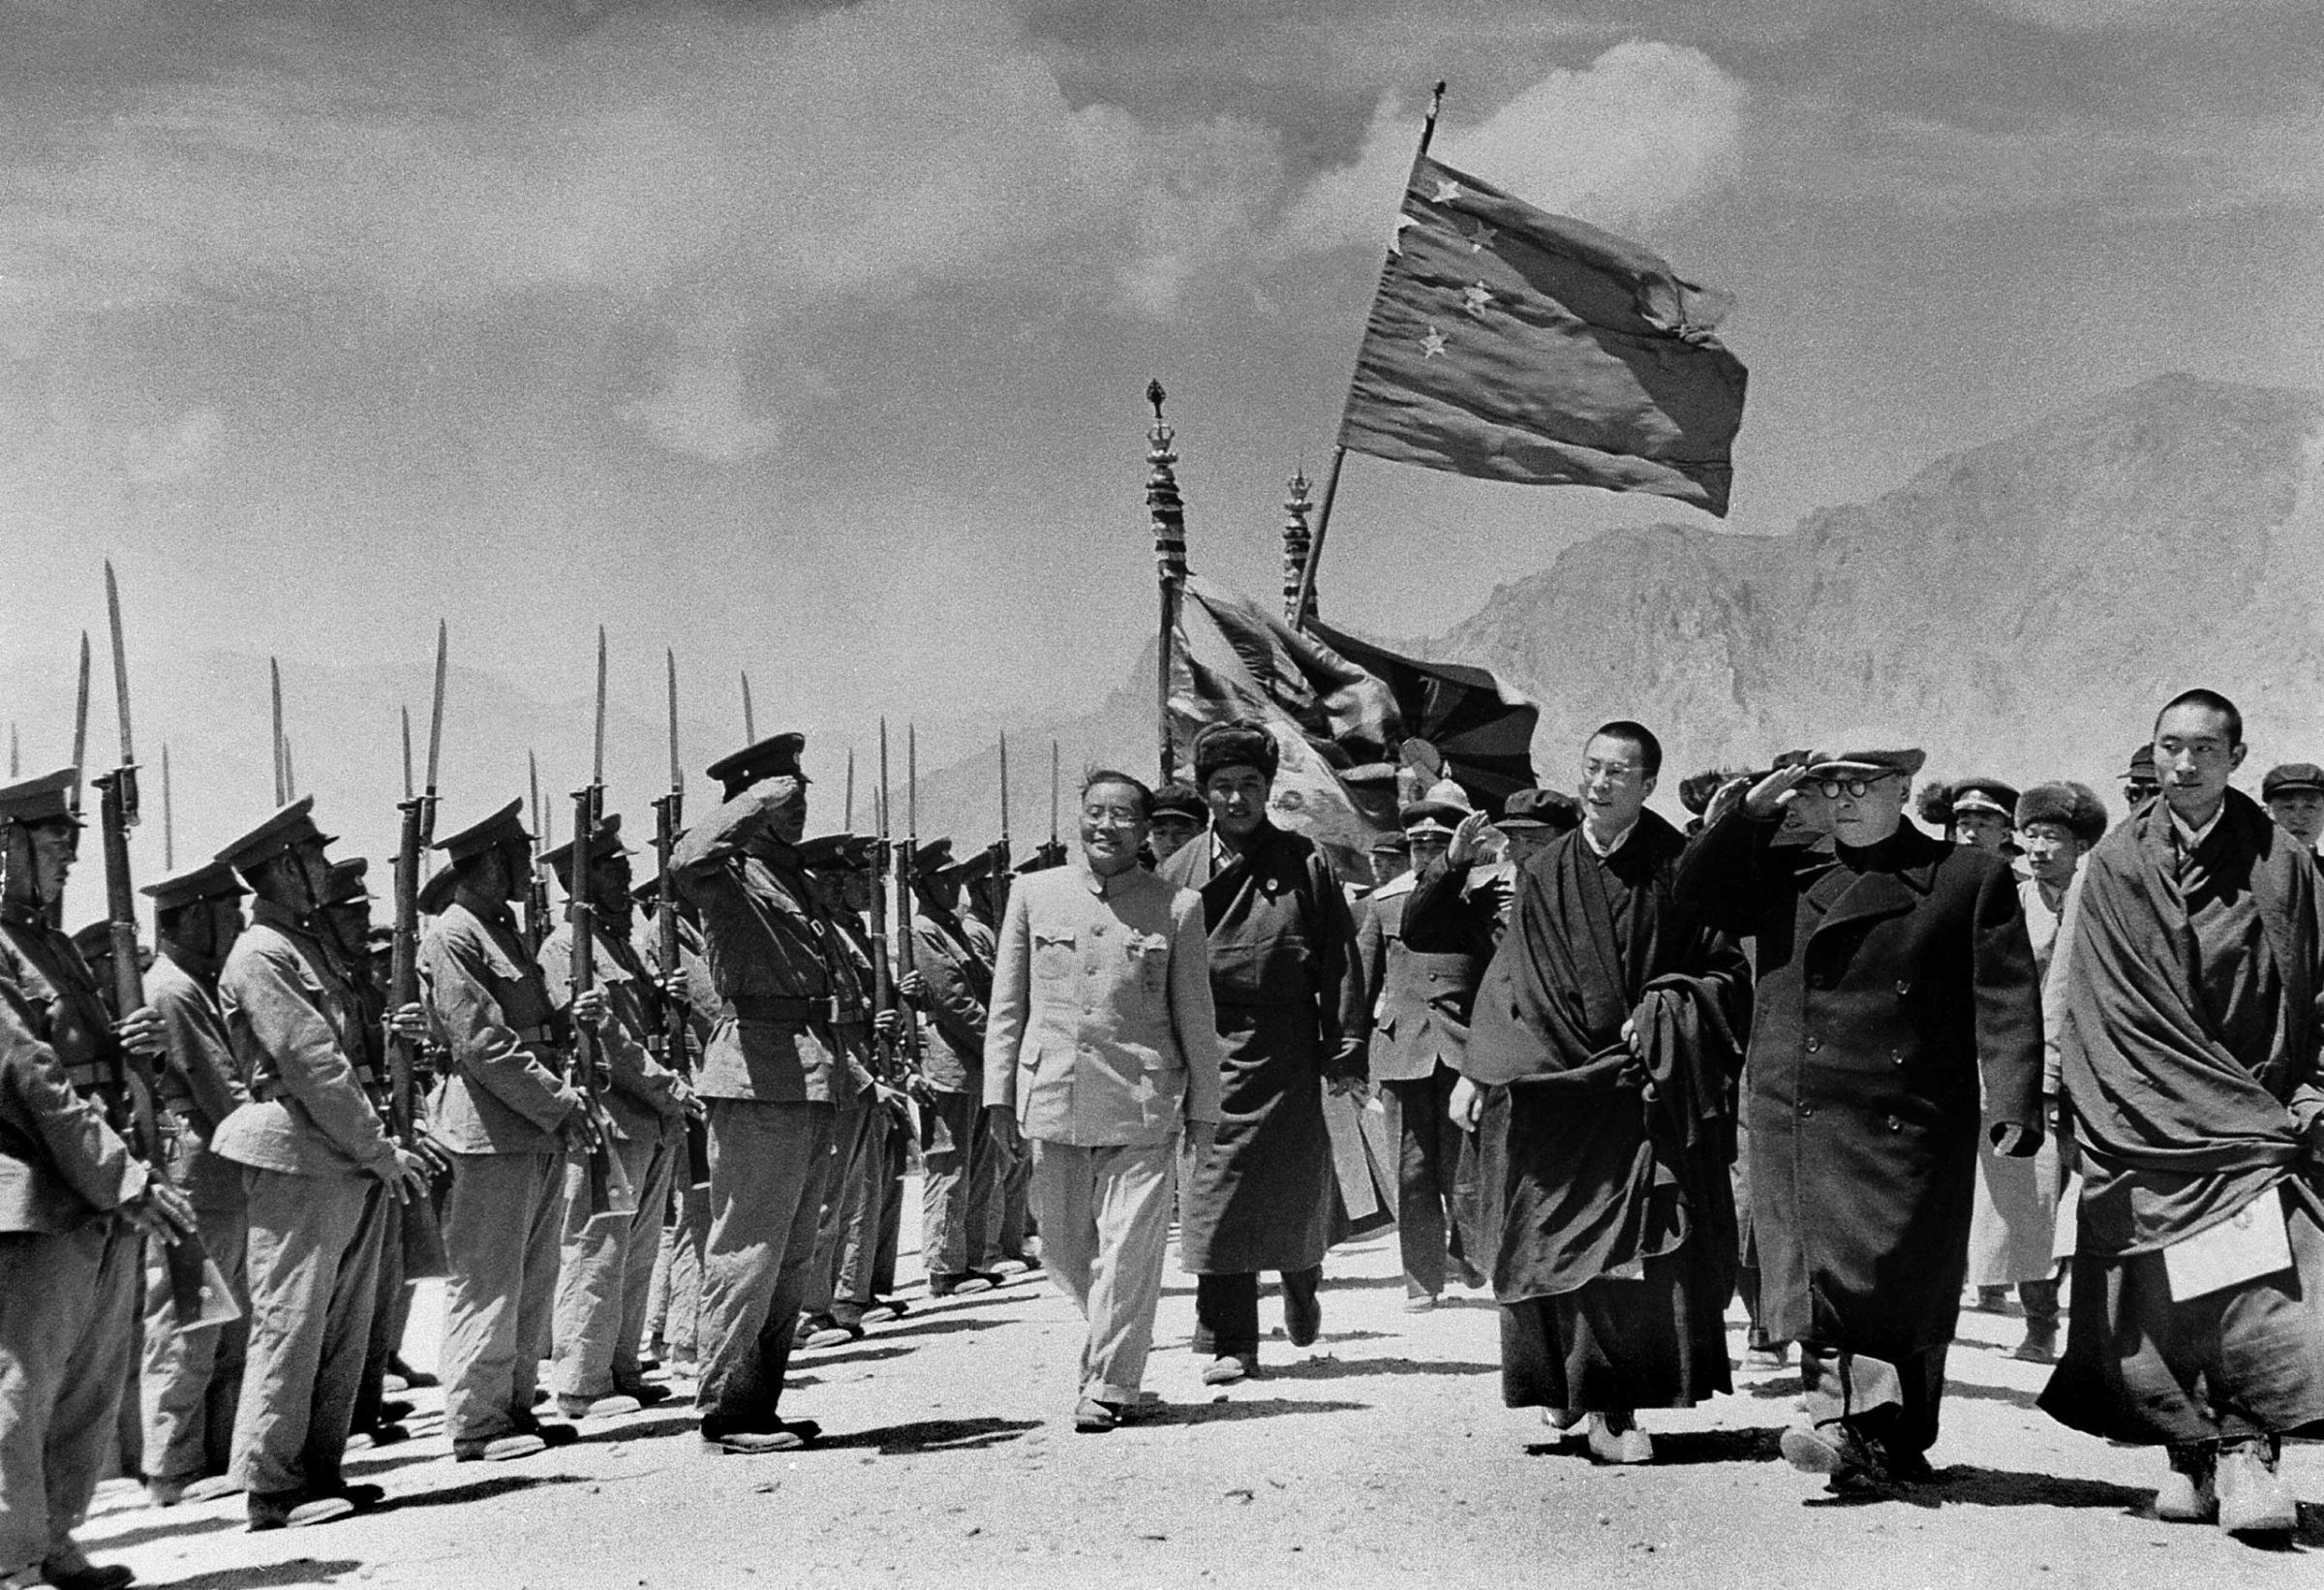 Dalai Lama seen with members of a Chinese government delegation on their official visit to Tibet in 1956.